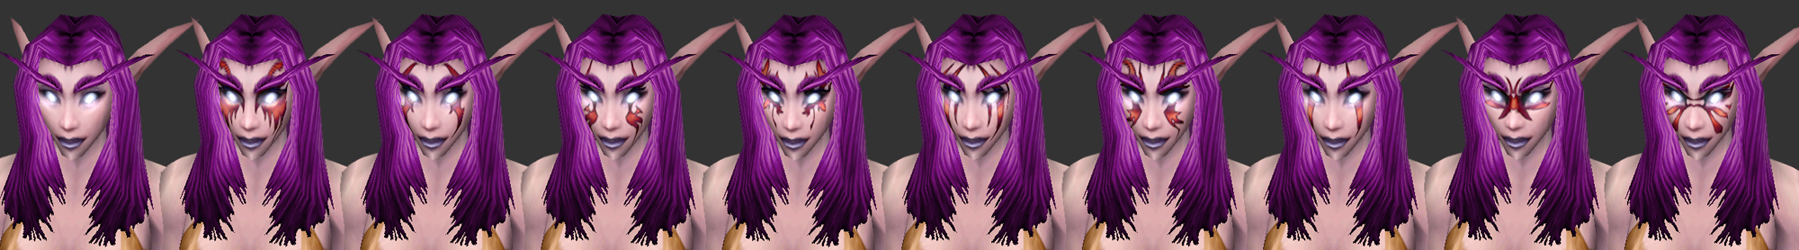 Night Elf Female Old Hd Model Preview Page 5